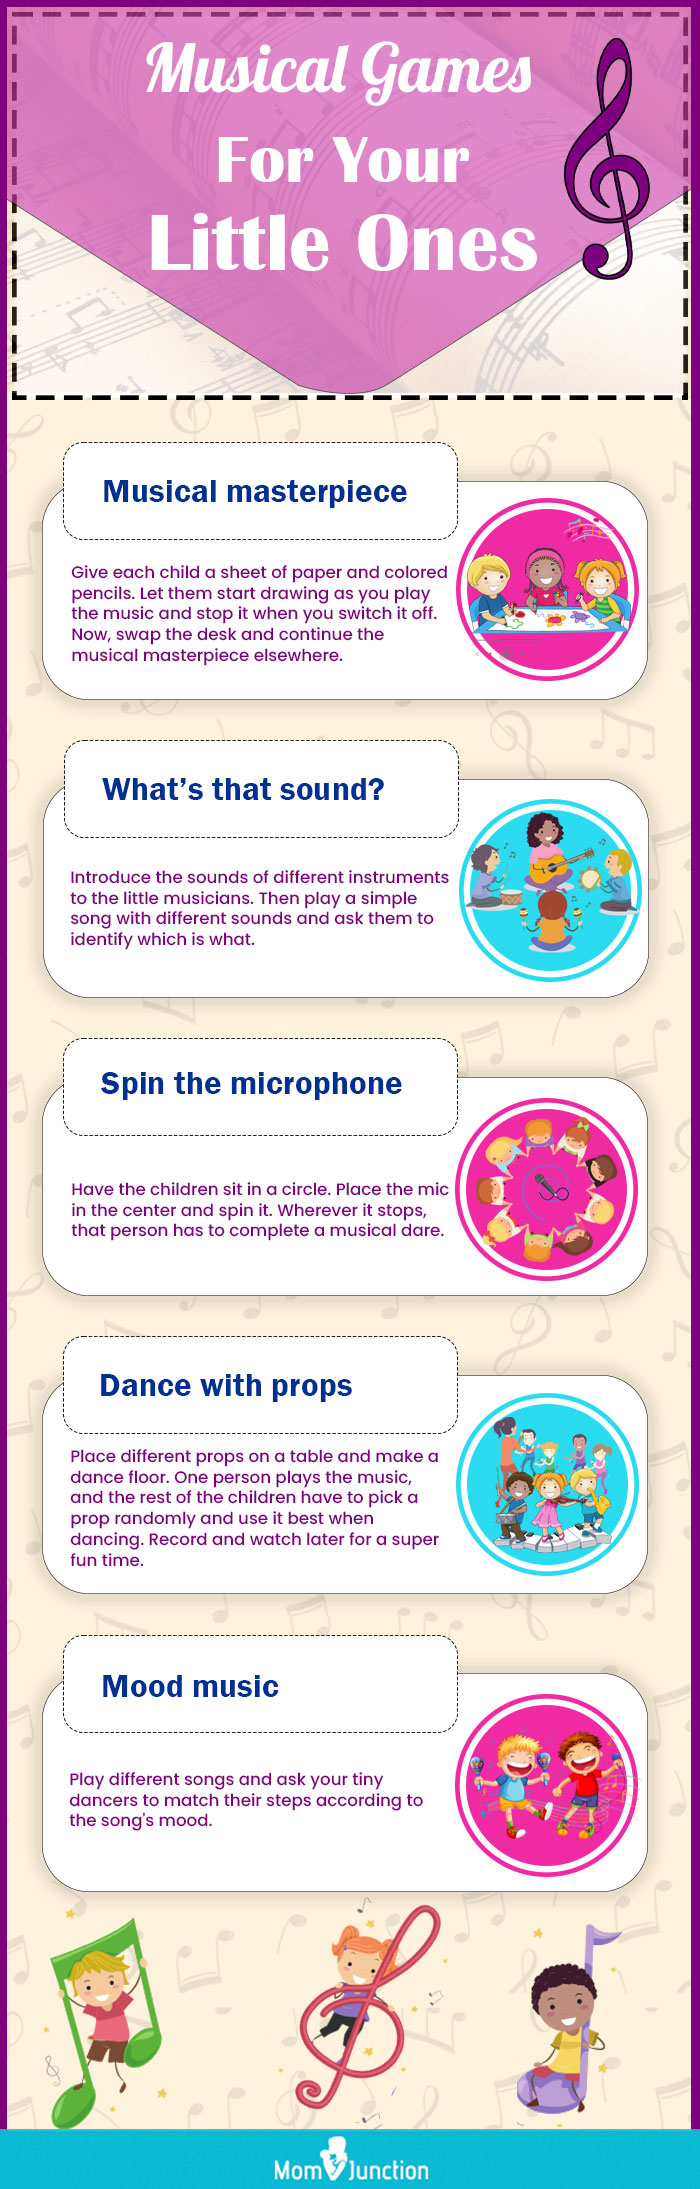 19 Amazing Music Games And Activities For Kids